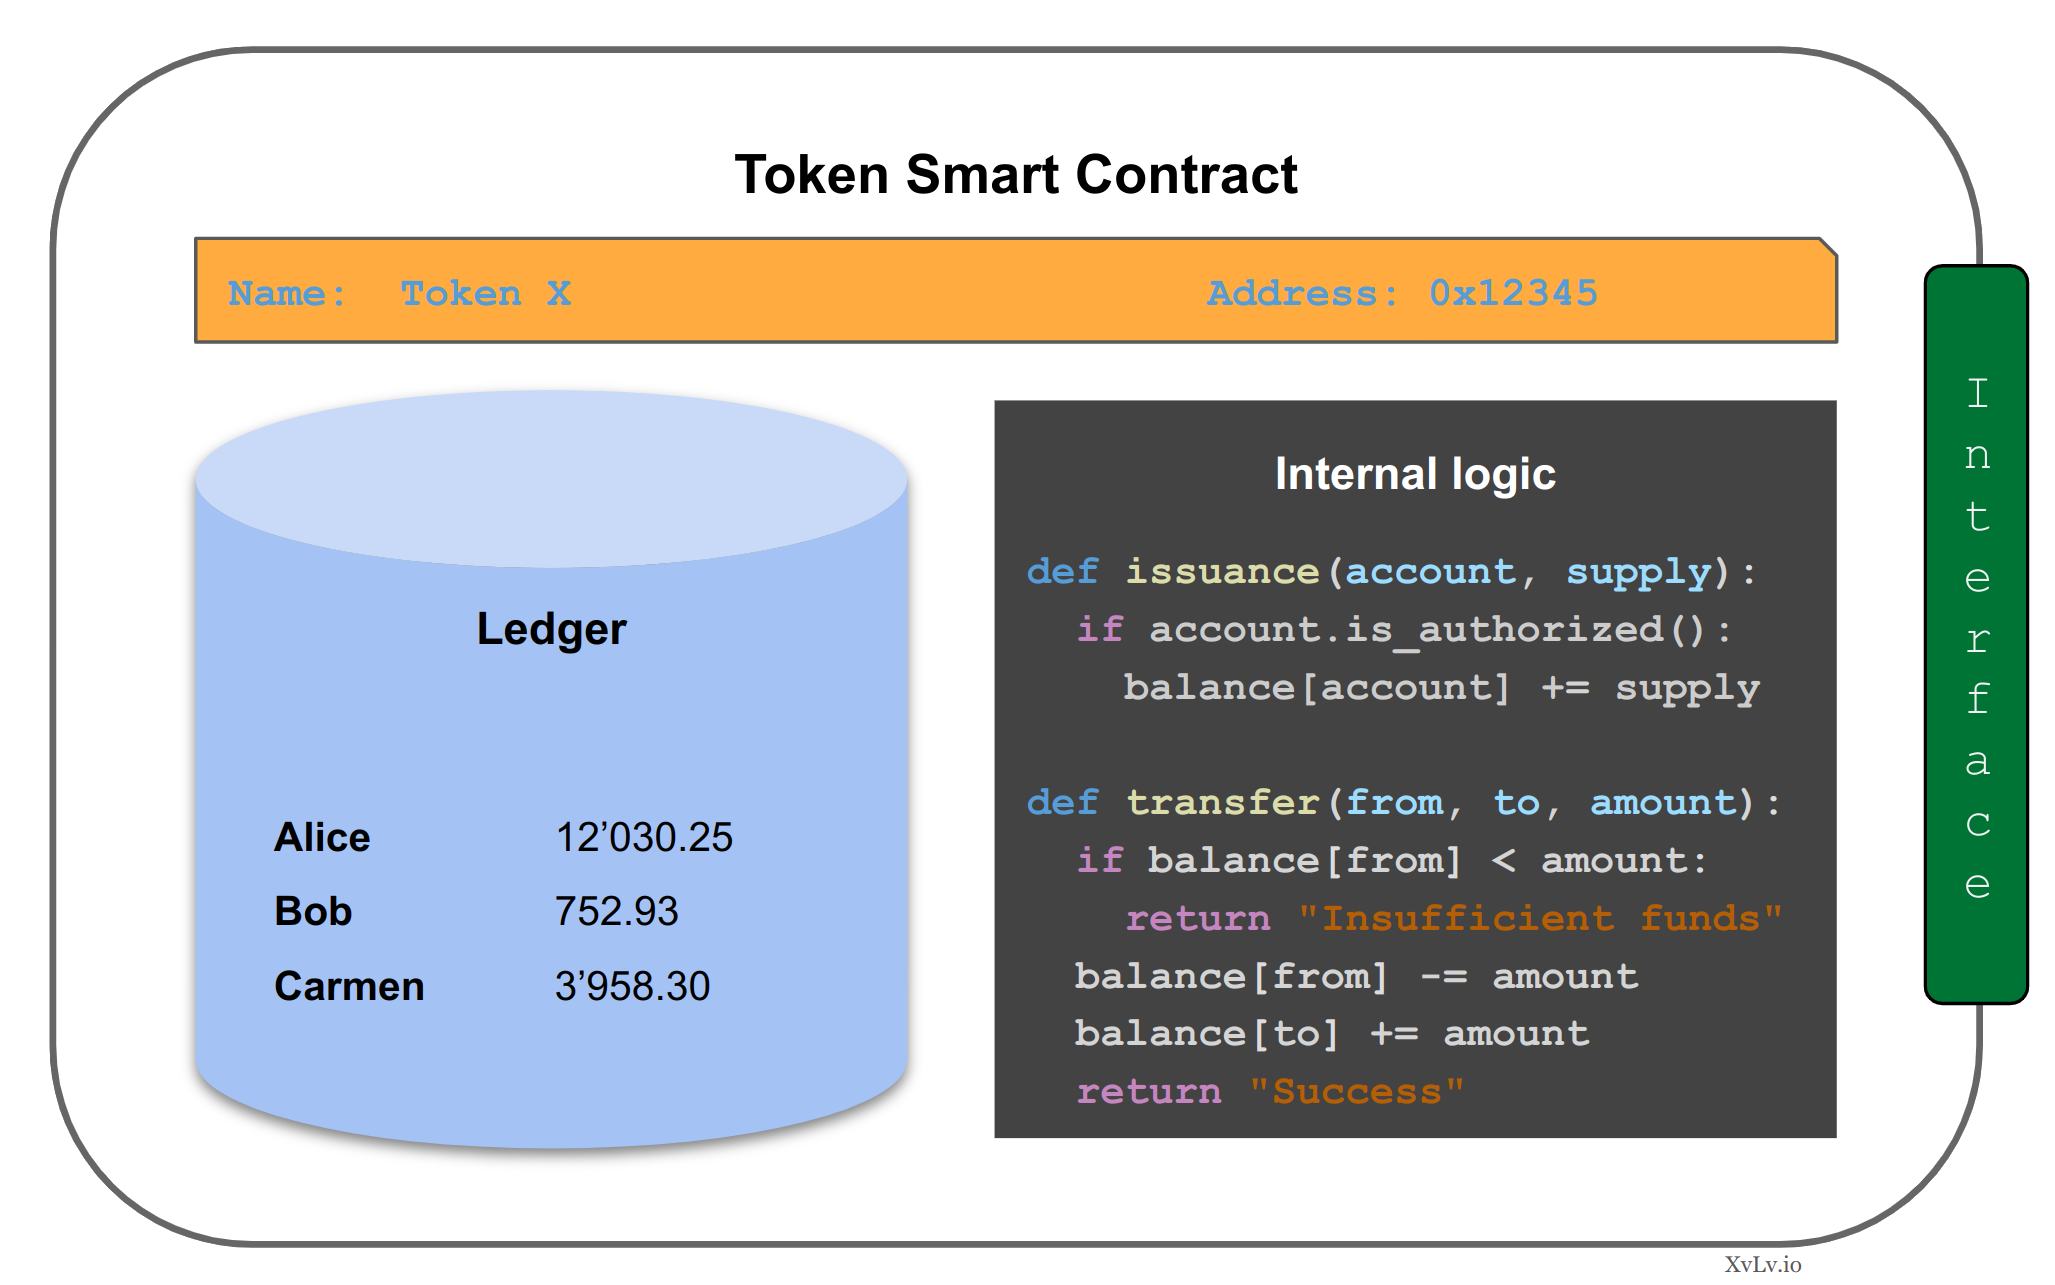 Sructure of a Token Smart Contract: ledger, internal logic, interface and static data